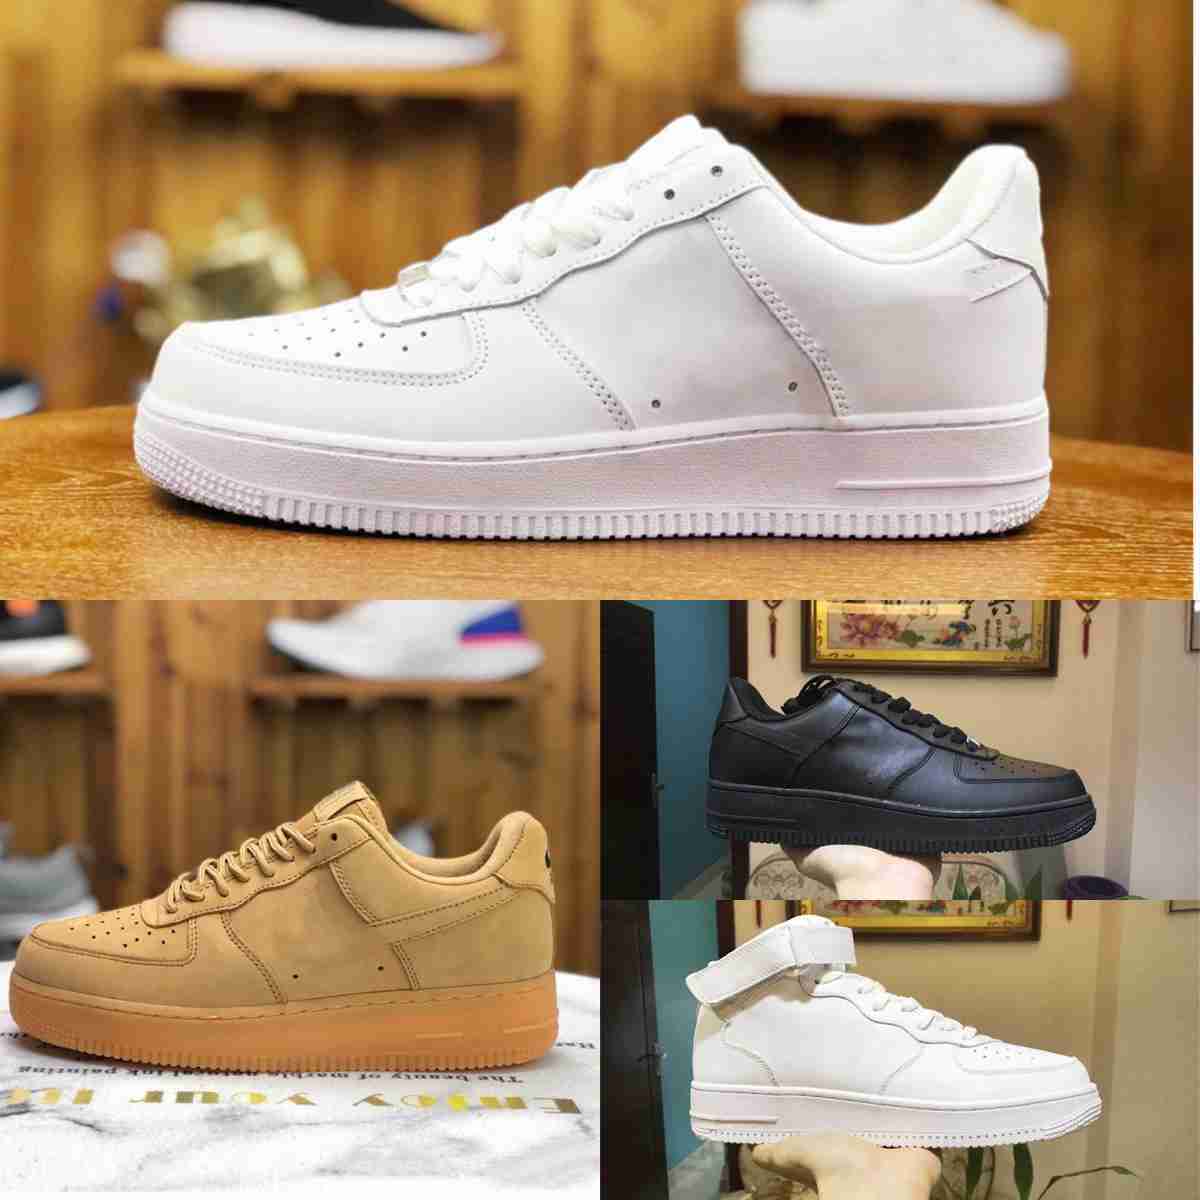 

Trainers Airforce 1 Classic Running Shoes One Skateboarding Triple White Black Wheat Airs Ones High Low Cut Runner Forces 1s Original Skate RetroS Sports Sneakers, Please contact us